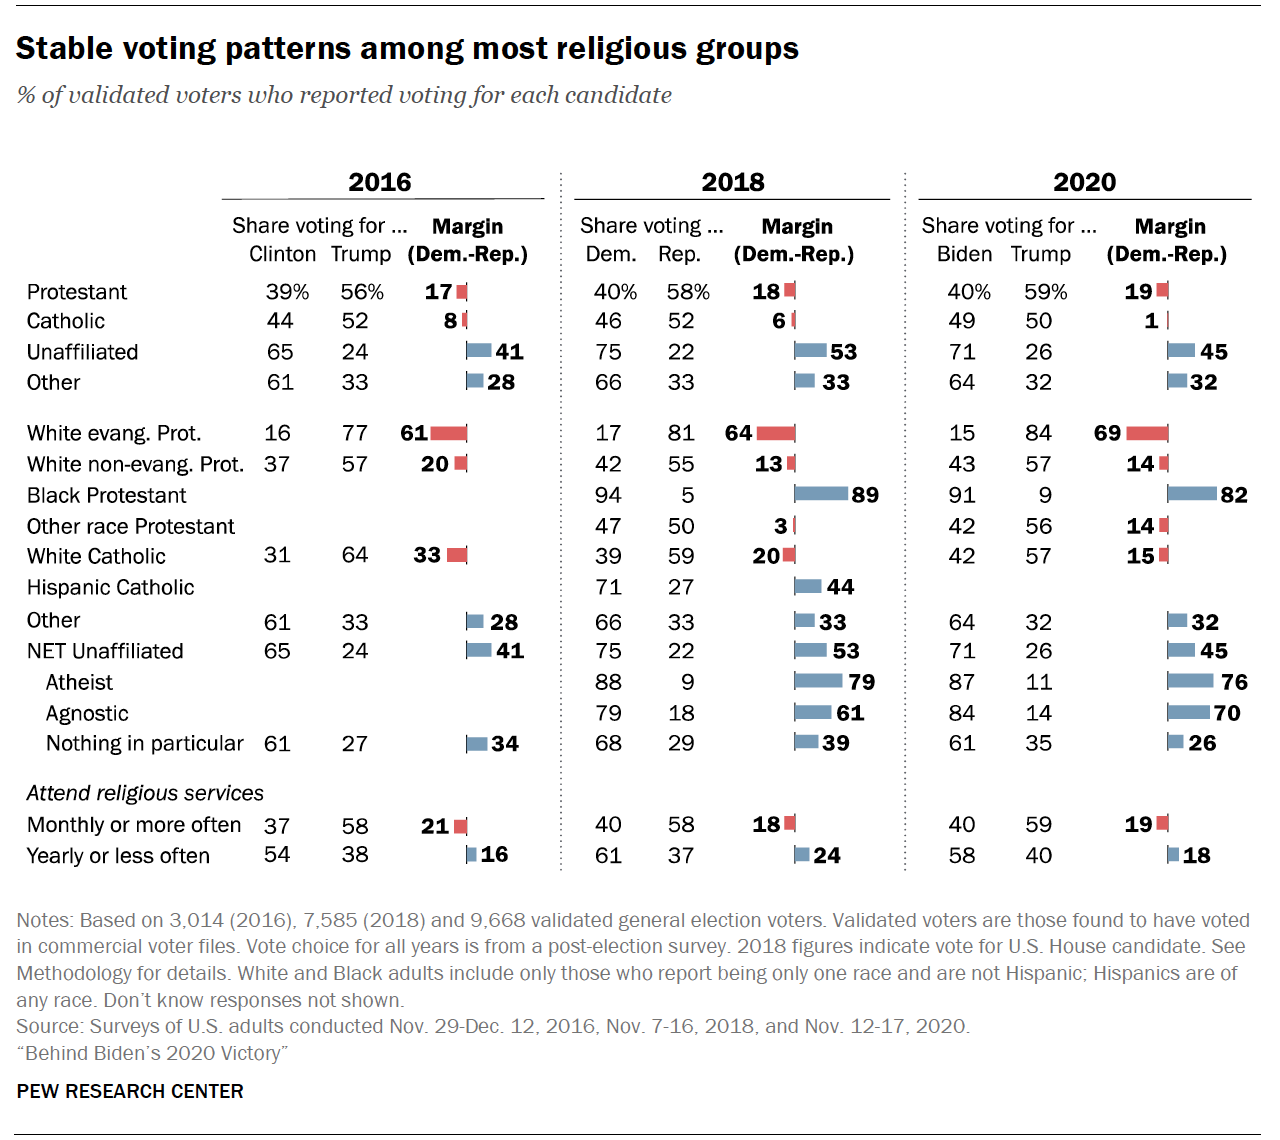 Share of 2016 and 2020 voters by religion